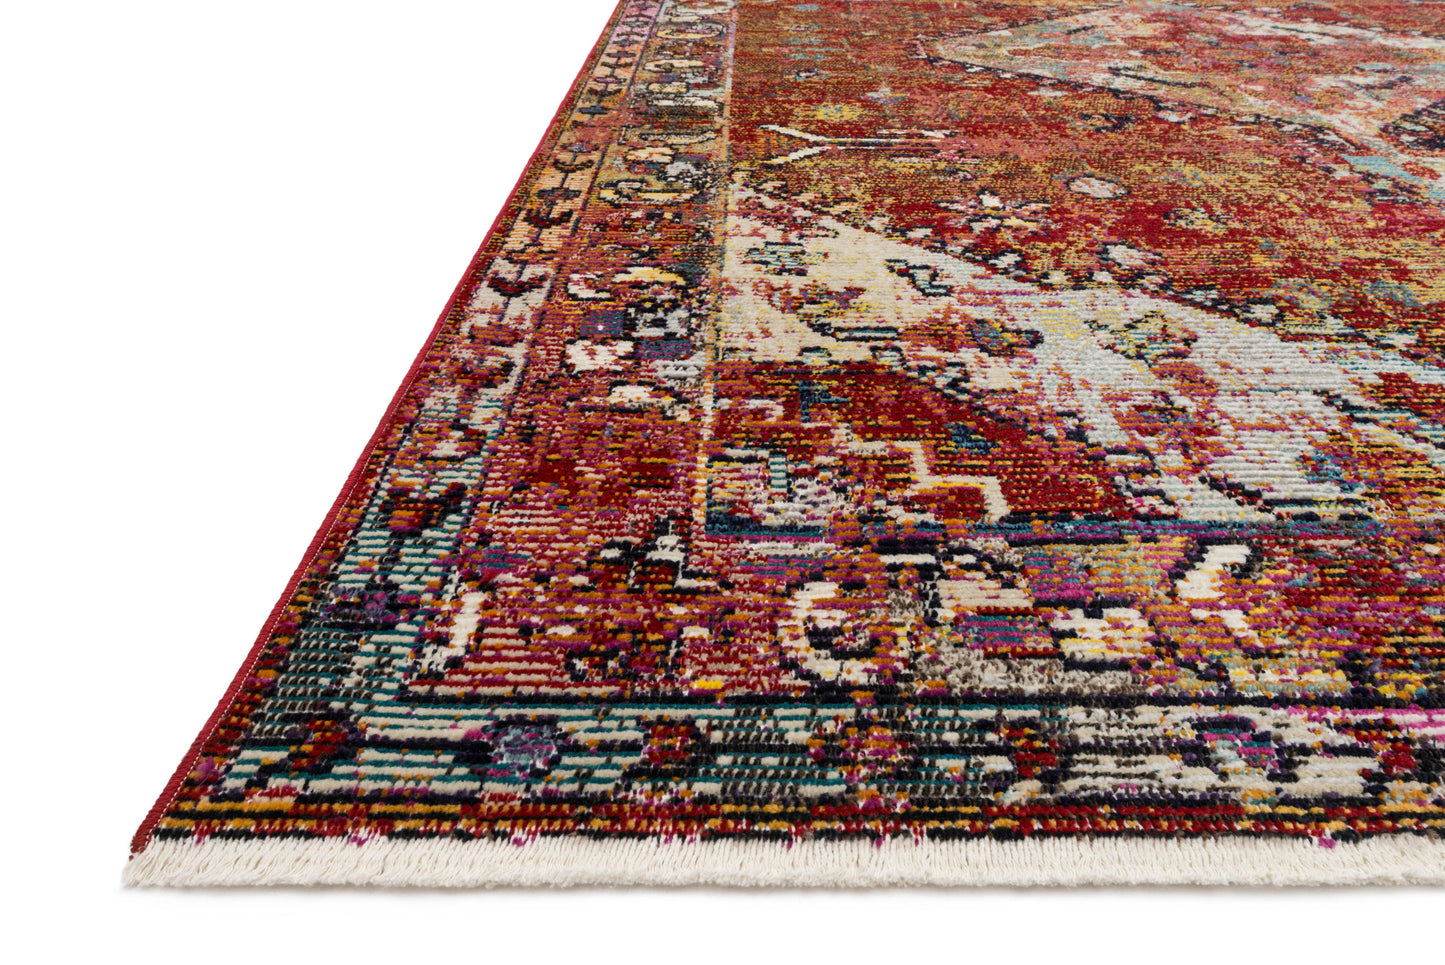 Silvia ED Synthetic Blend Indoor Area Rug from Justina Blakeney x Loloi